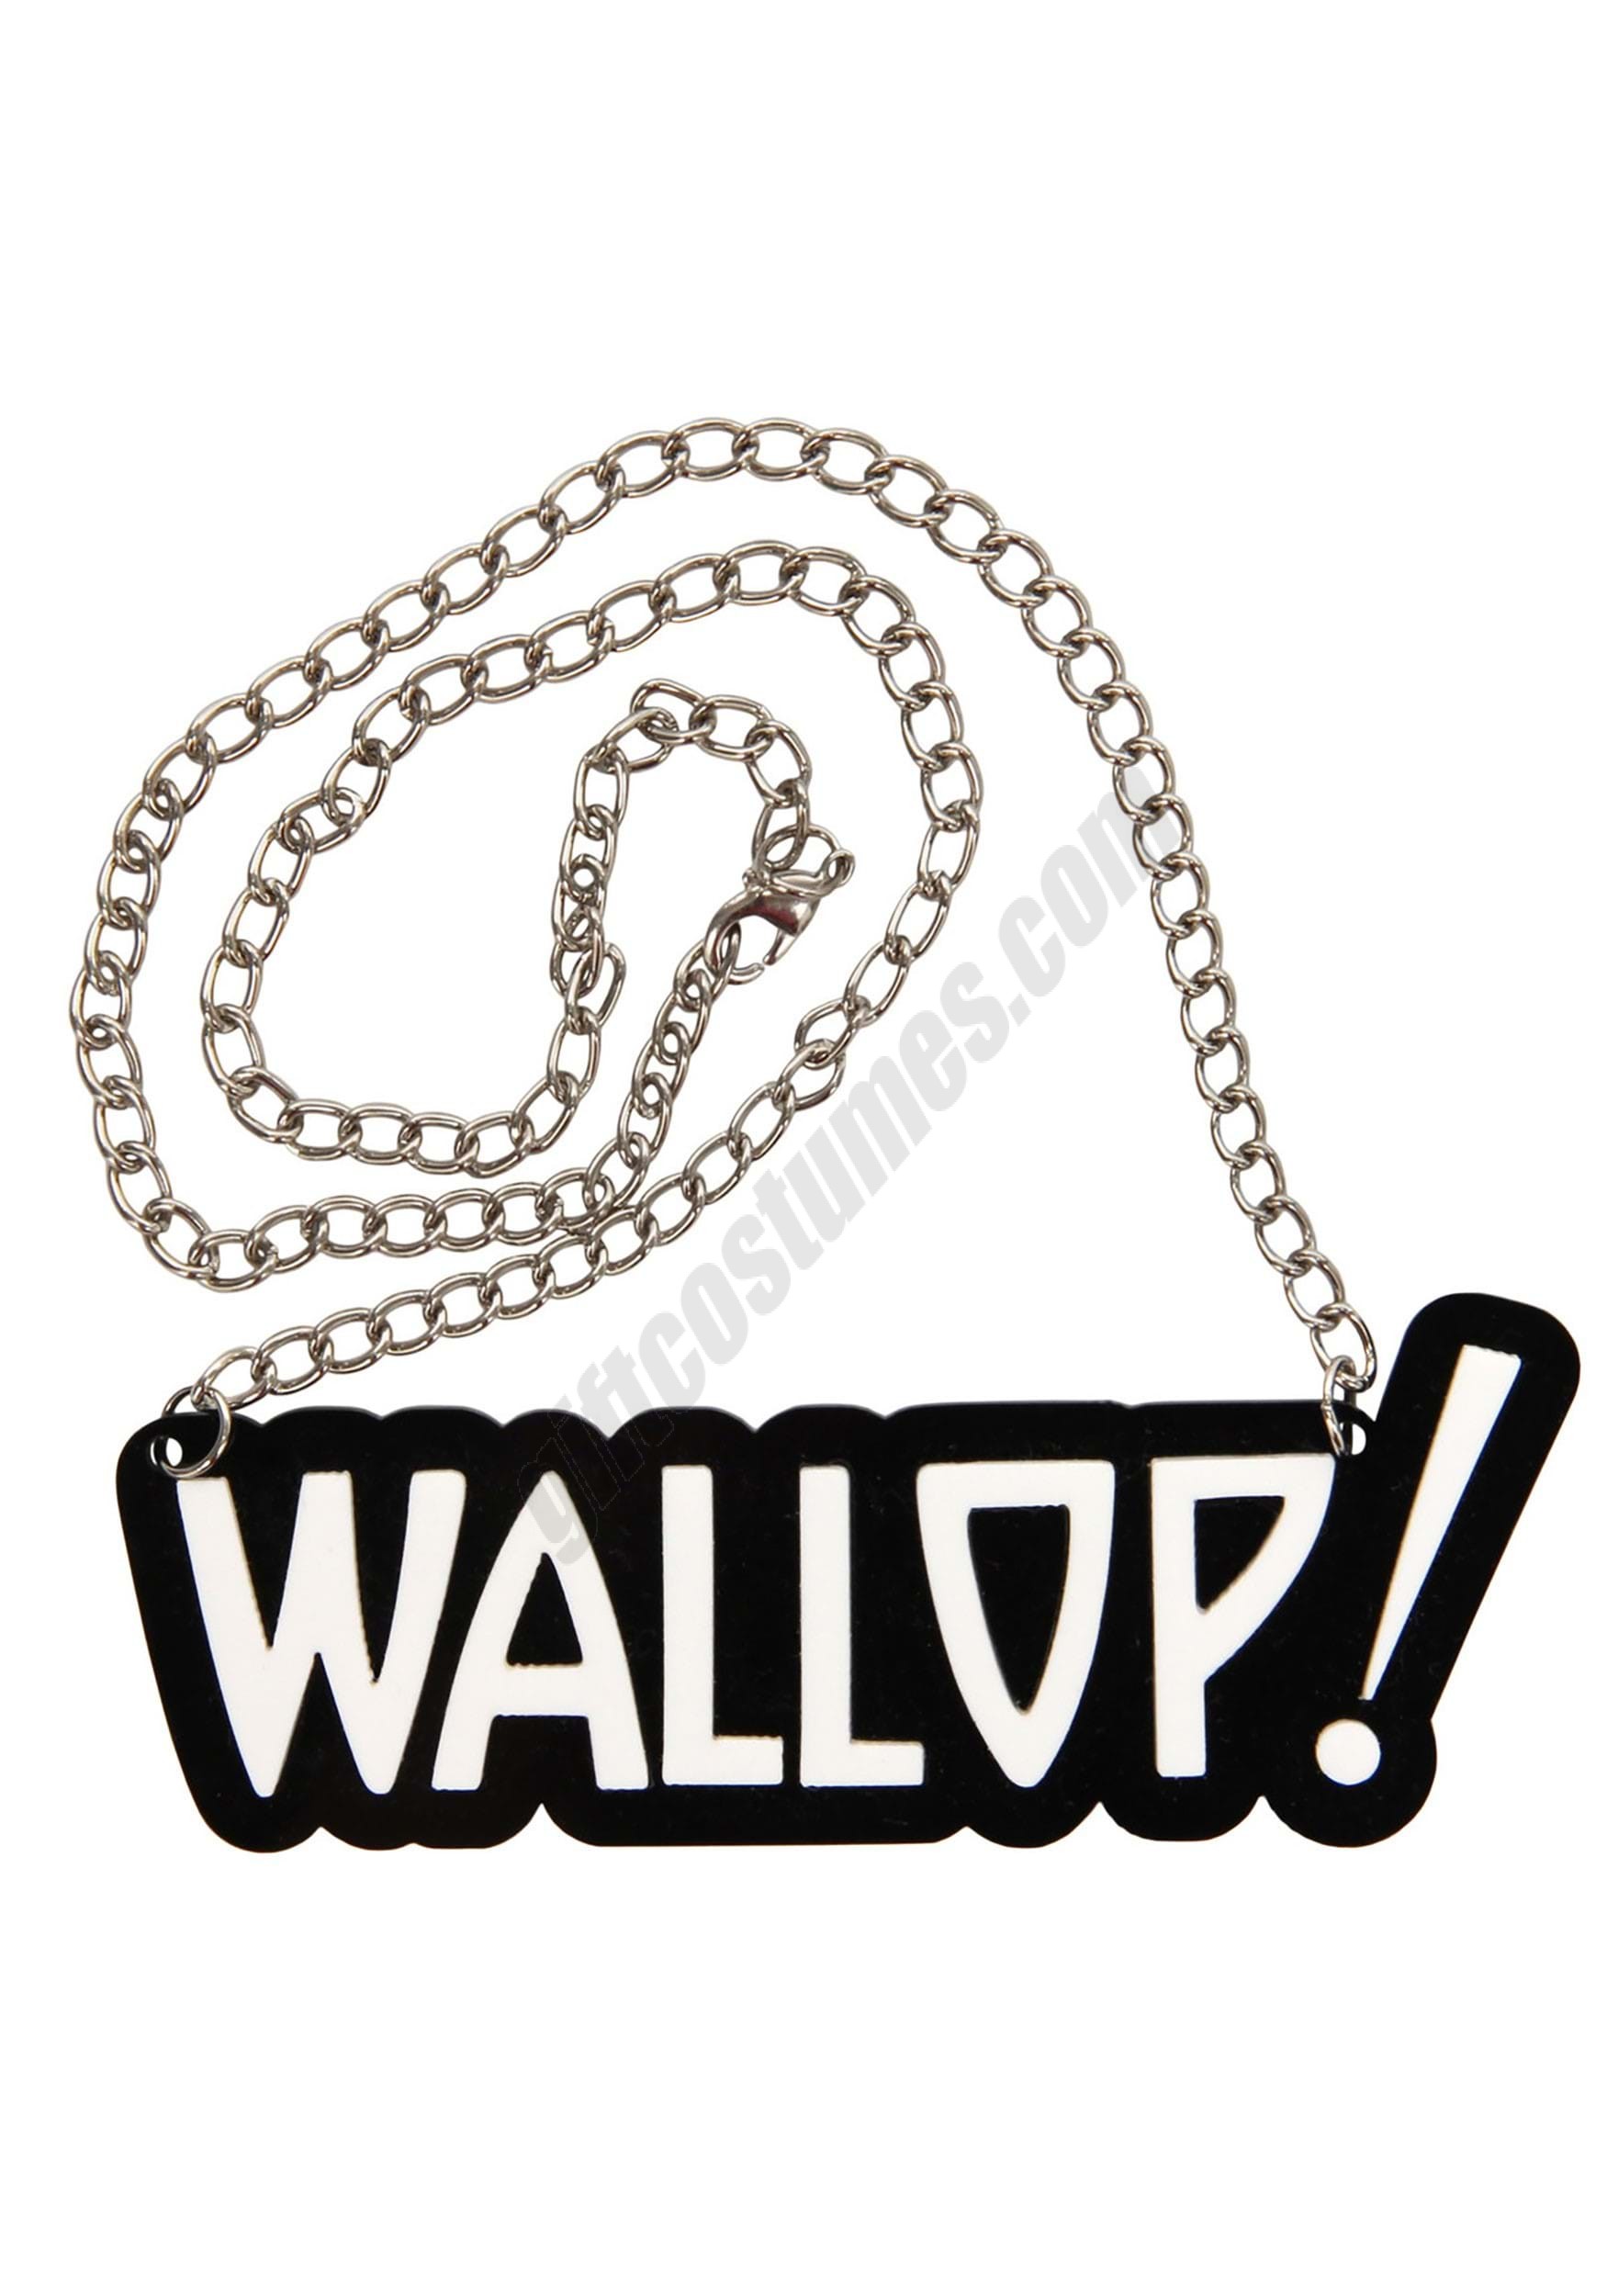 Wallop! Cup Head Necklace Promotions - Wallop! Cup Head Necklace Promotions